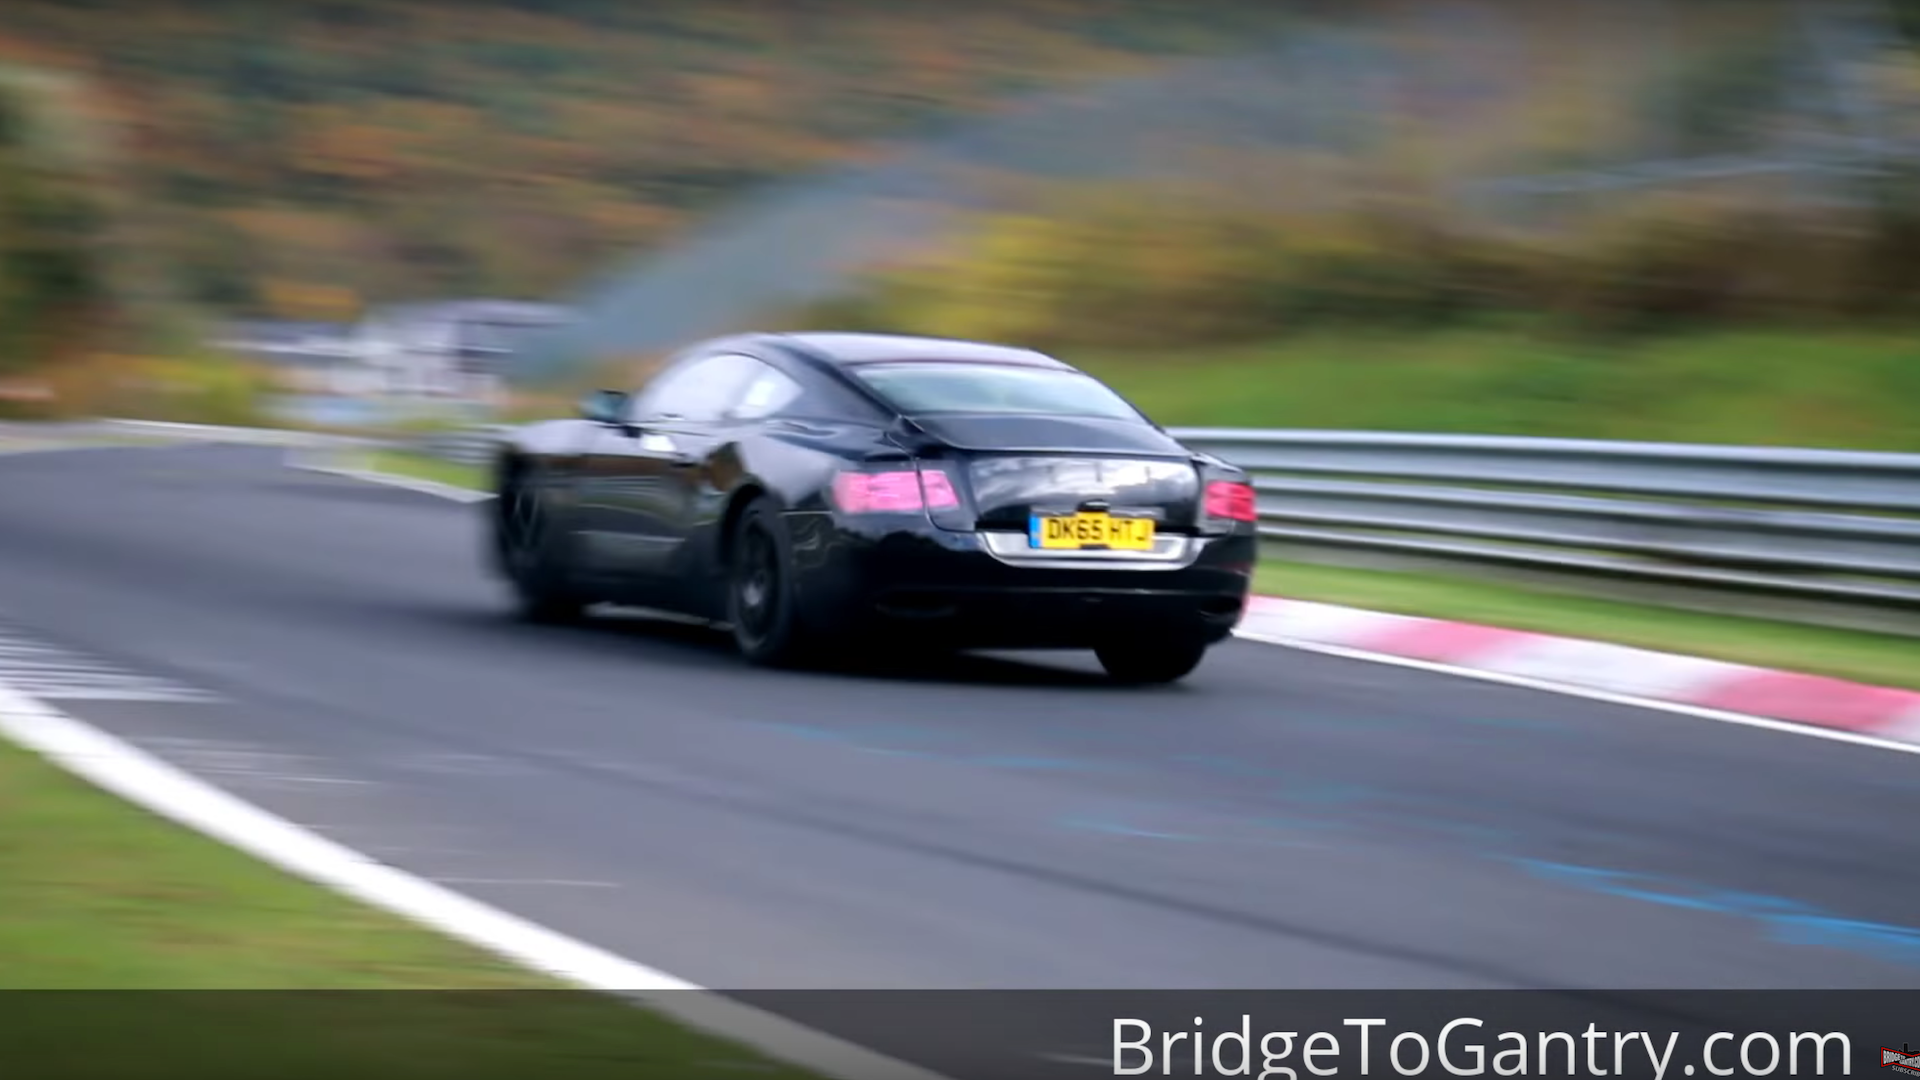 Check Out These Bentley Prototypes Caught Lapping the Nurburgring